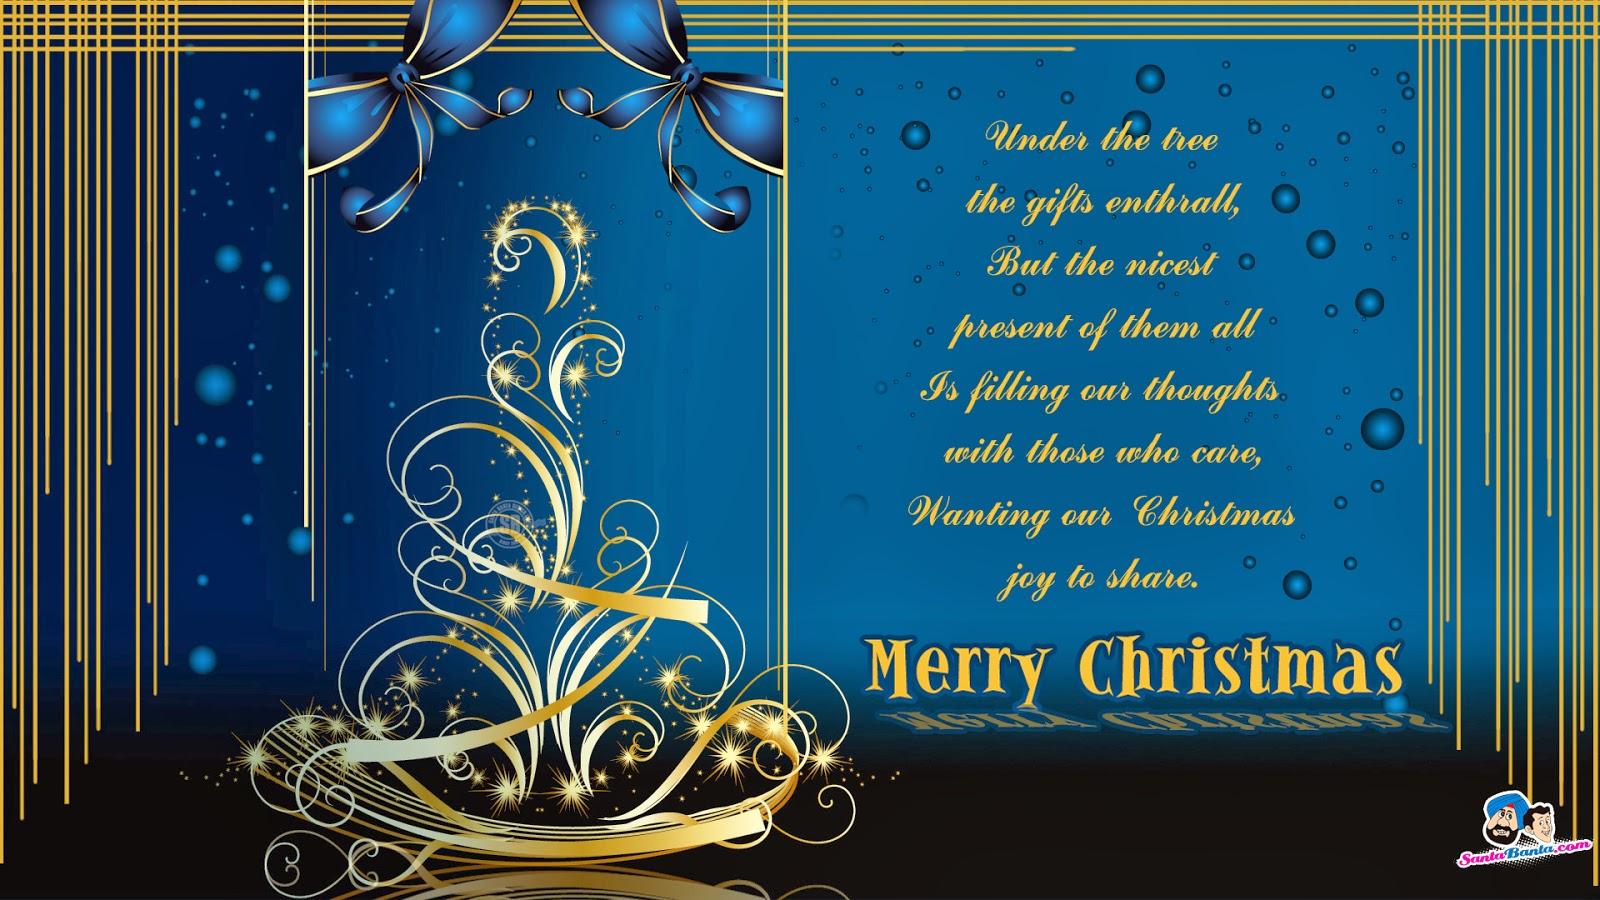 Download HD Christmas & New Year 2018 Bible Verse Greetings